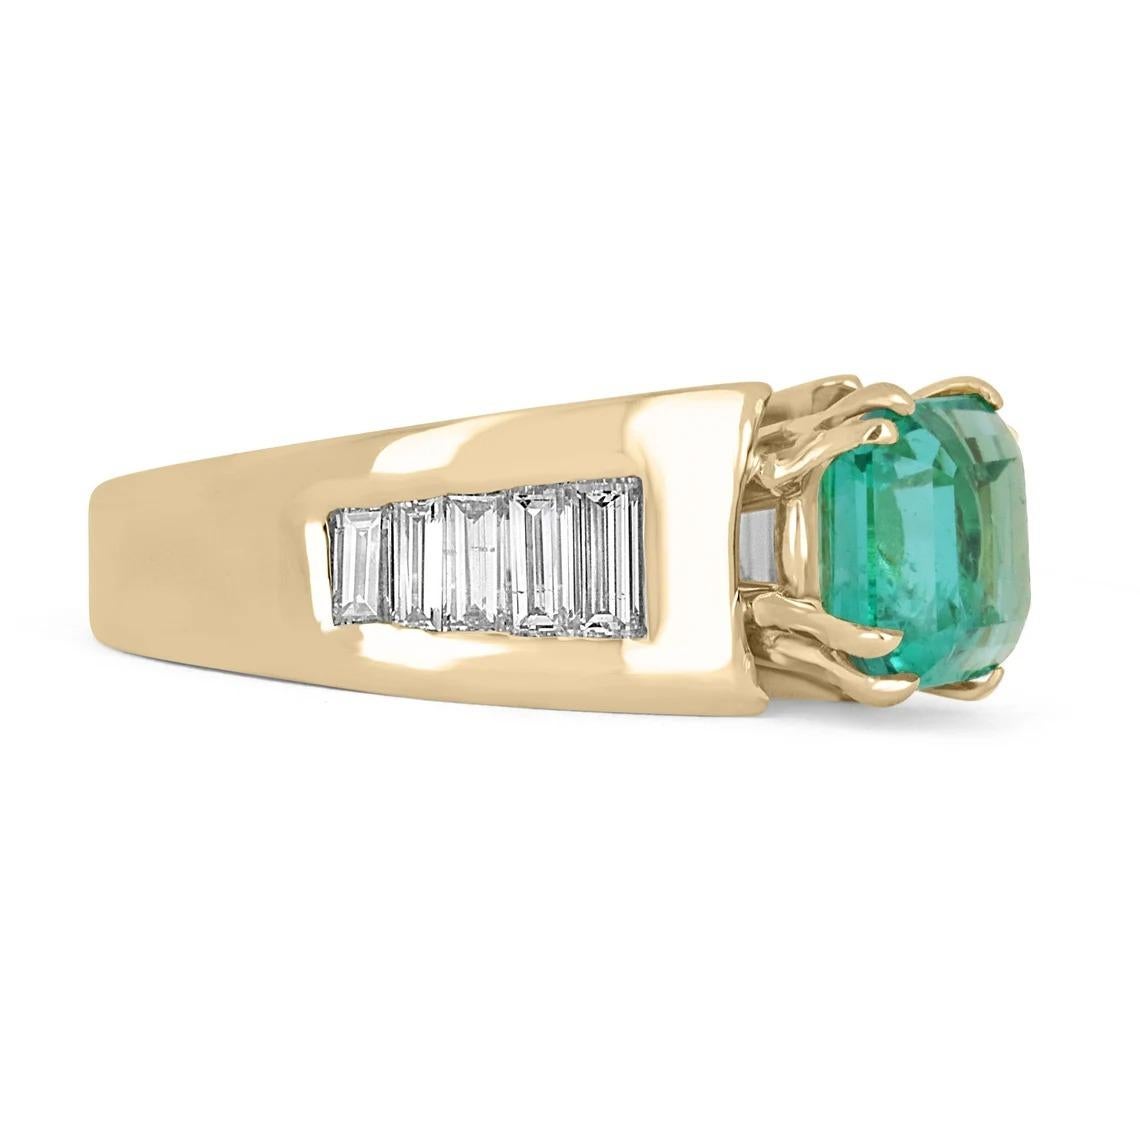 A remarkable Colombian emerald and diamond ring. The center stone carries a full 2.71-carat Asscher cut natural Colombian emerald; displaying a stunning bluish-green color, and pellucid eye clarity. Fully faceted and set in a double-claw, prong